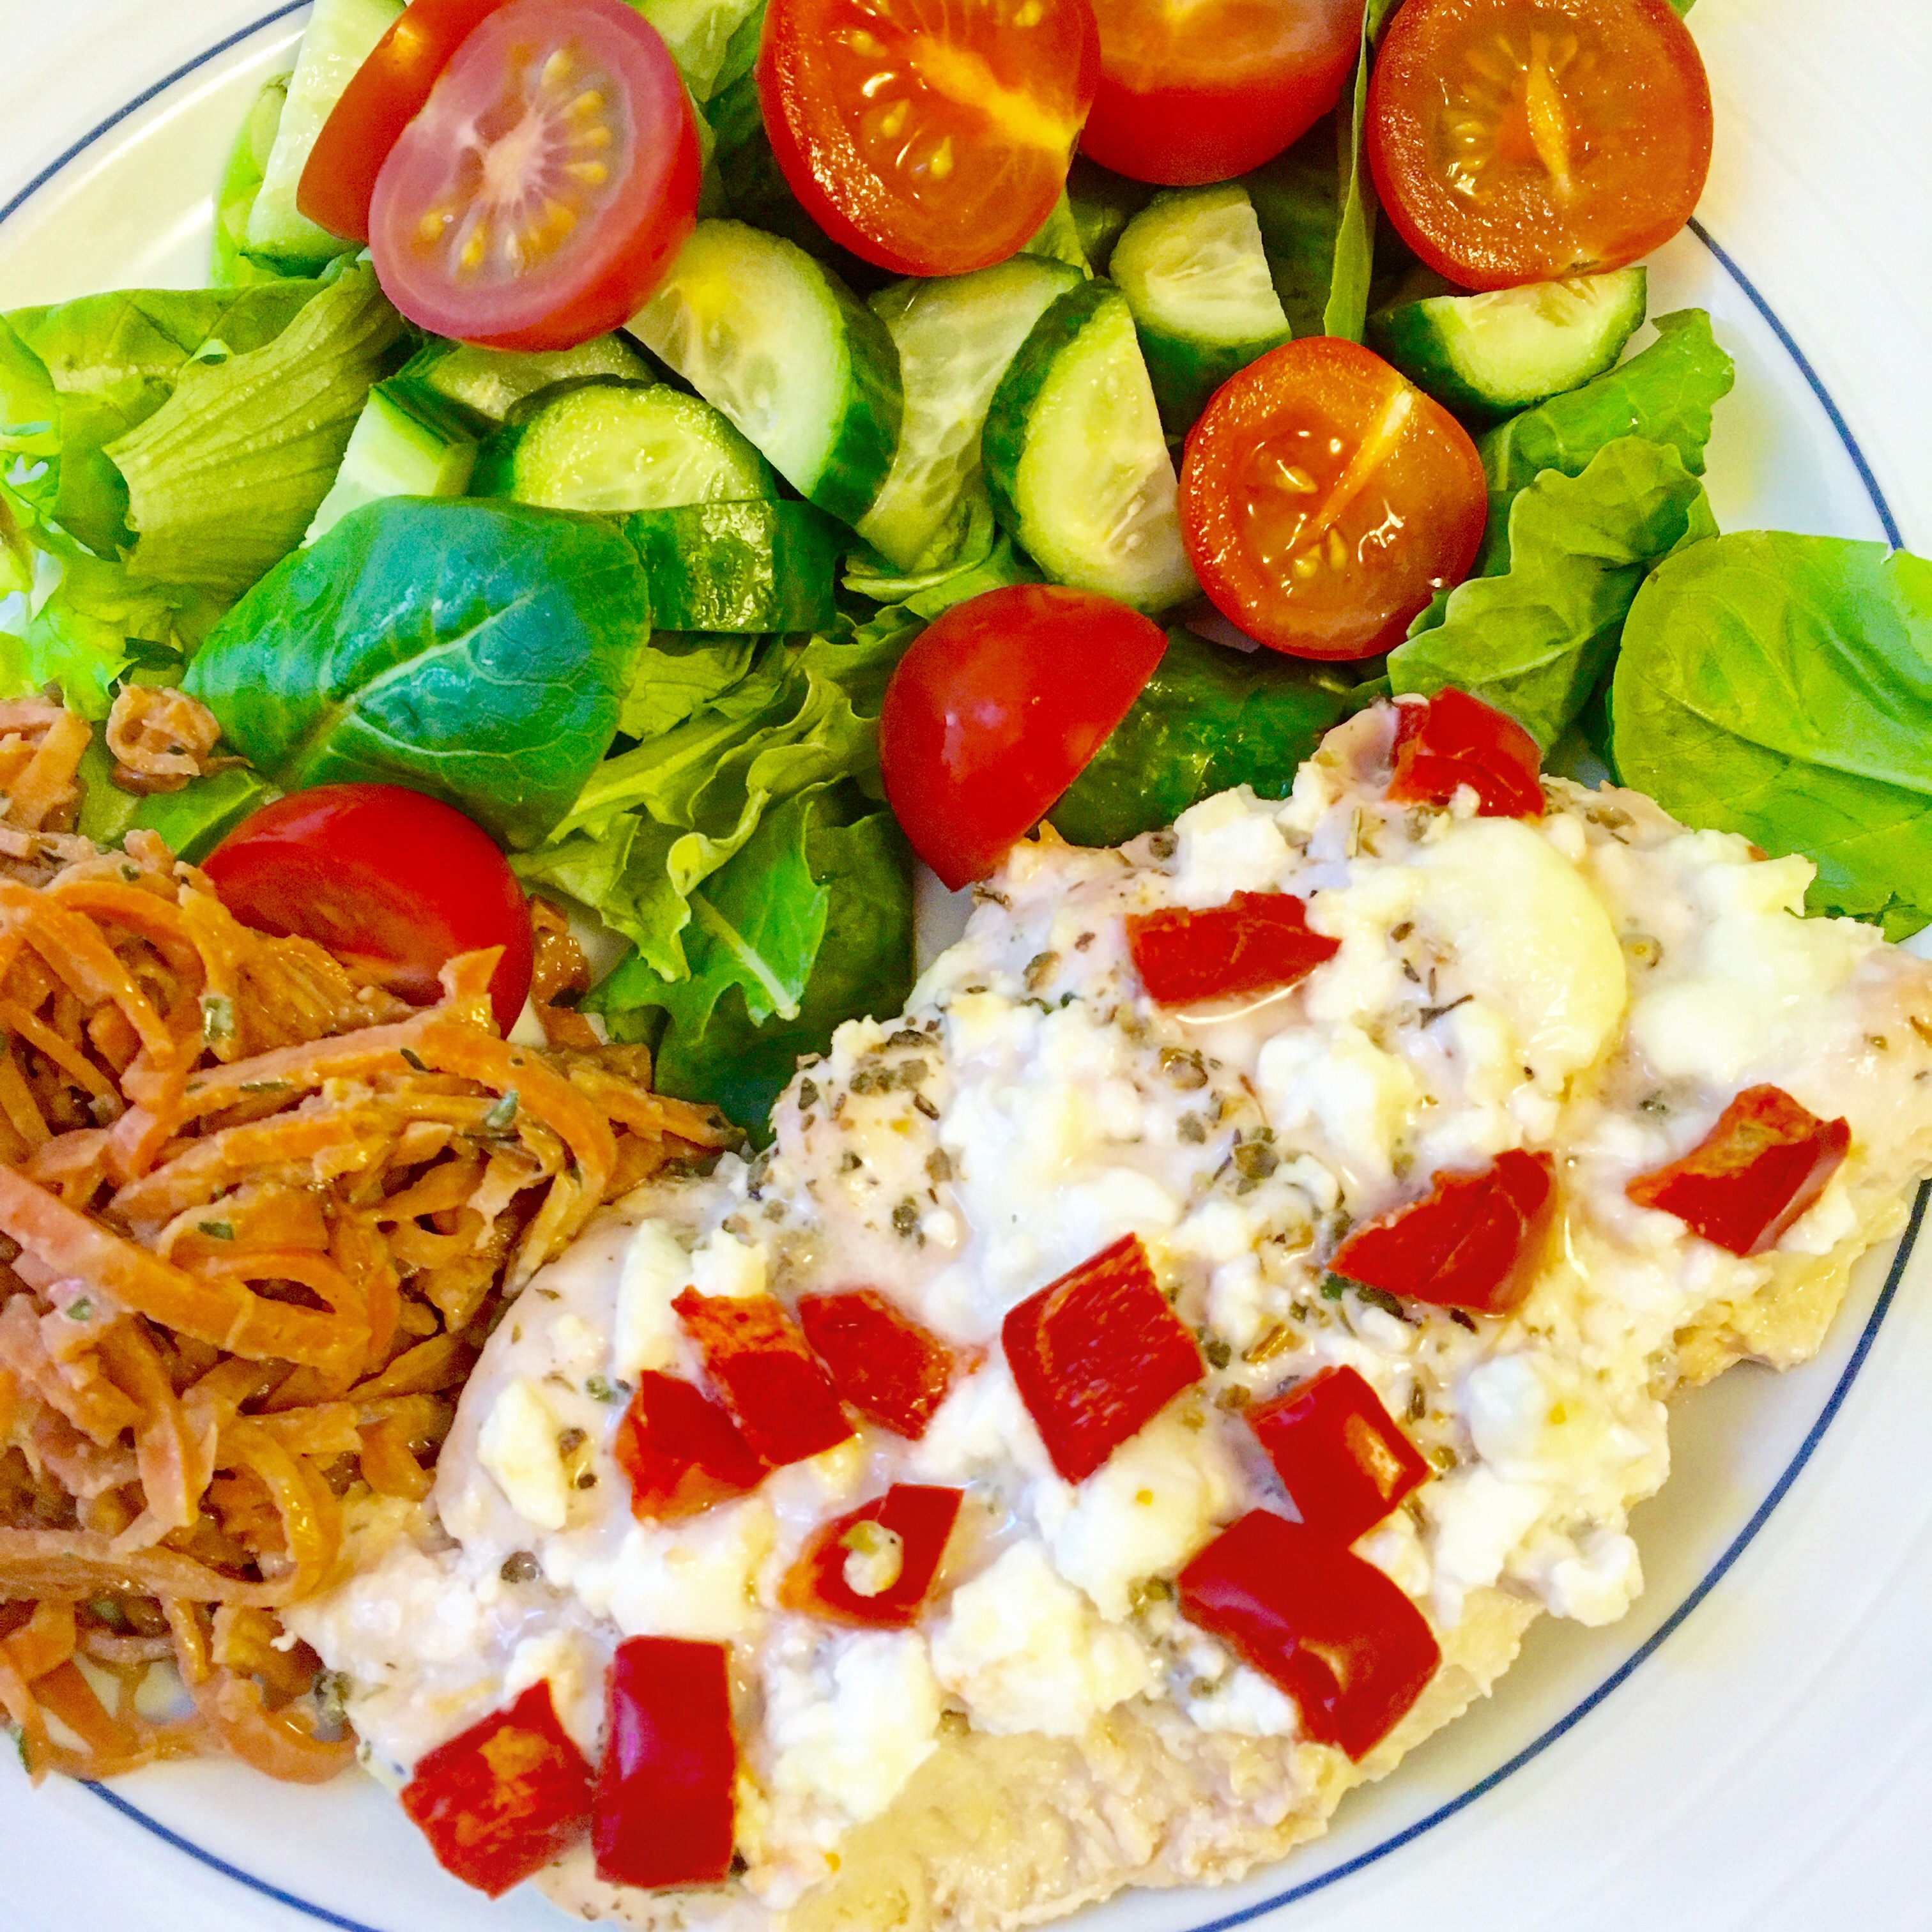 This Greek-inspired Baked Feta & Chicken dish is prepped in just 10 mins!